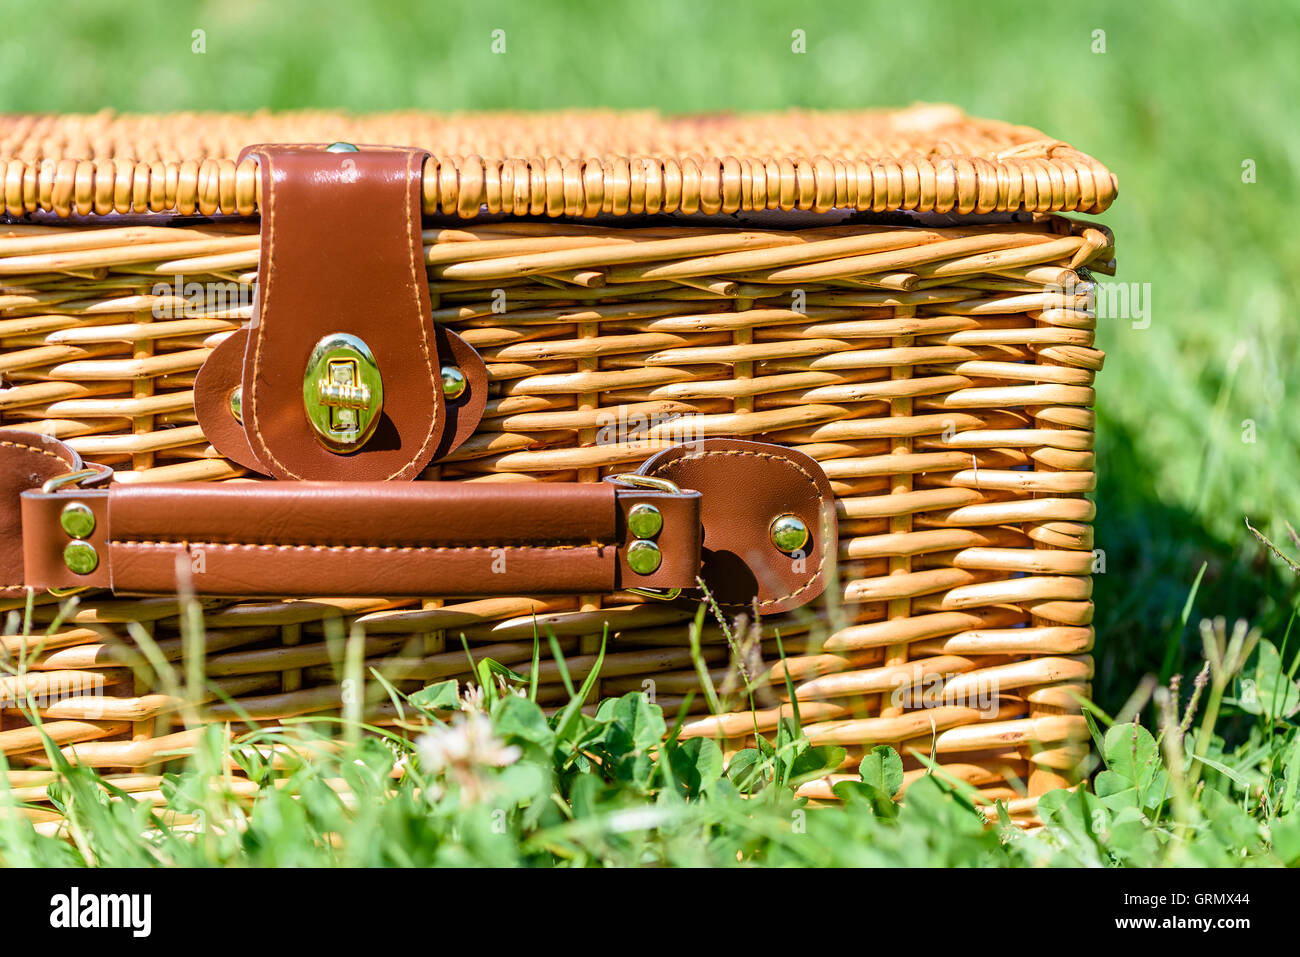 Picnic Basket Hamper With Leather Handle In Green Grass Stock Photo